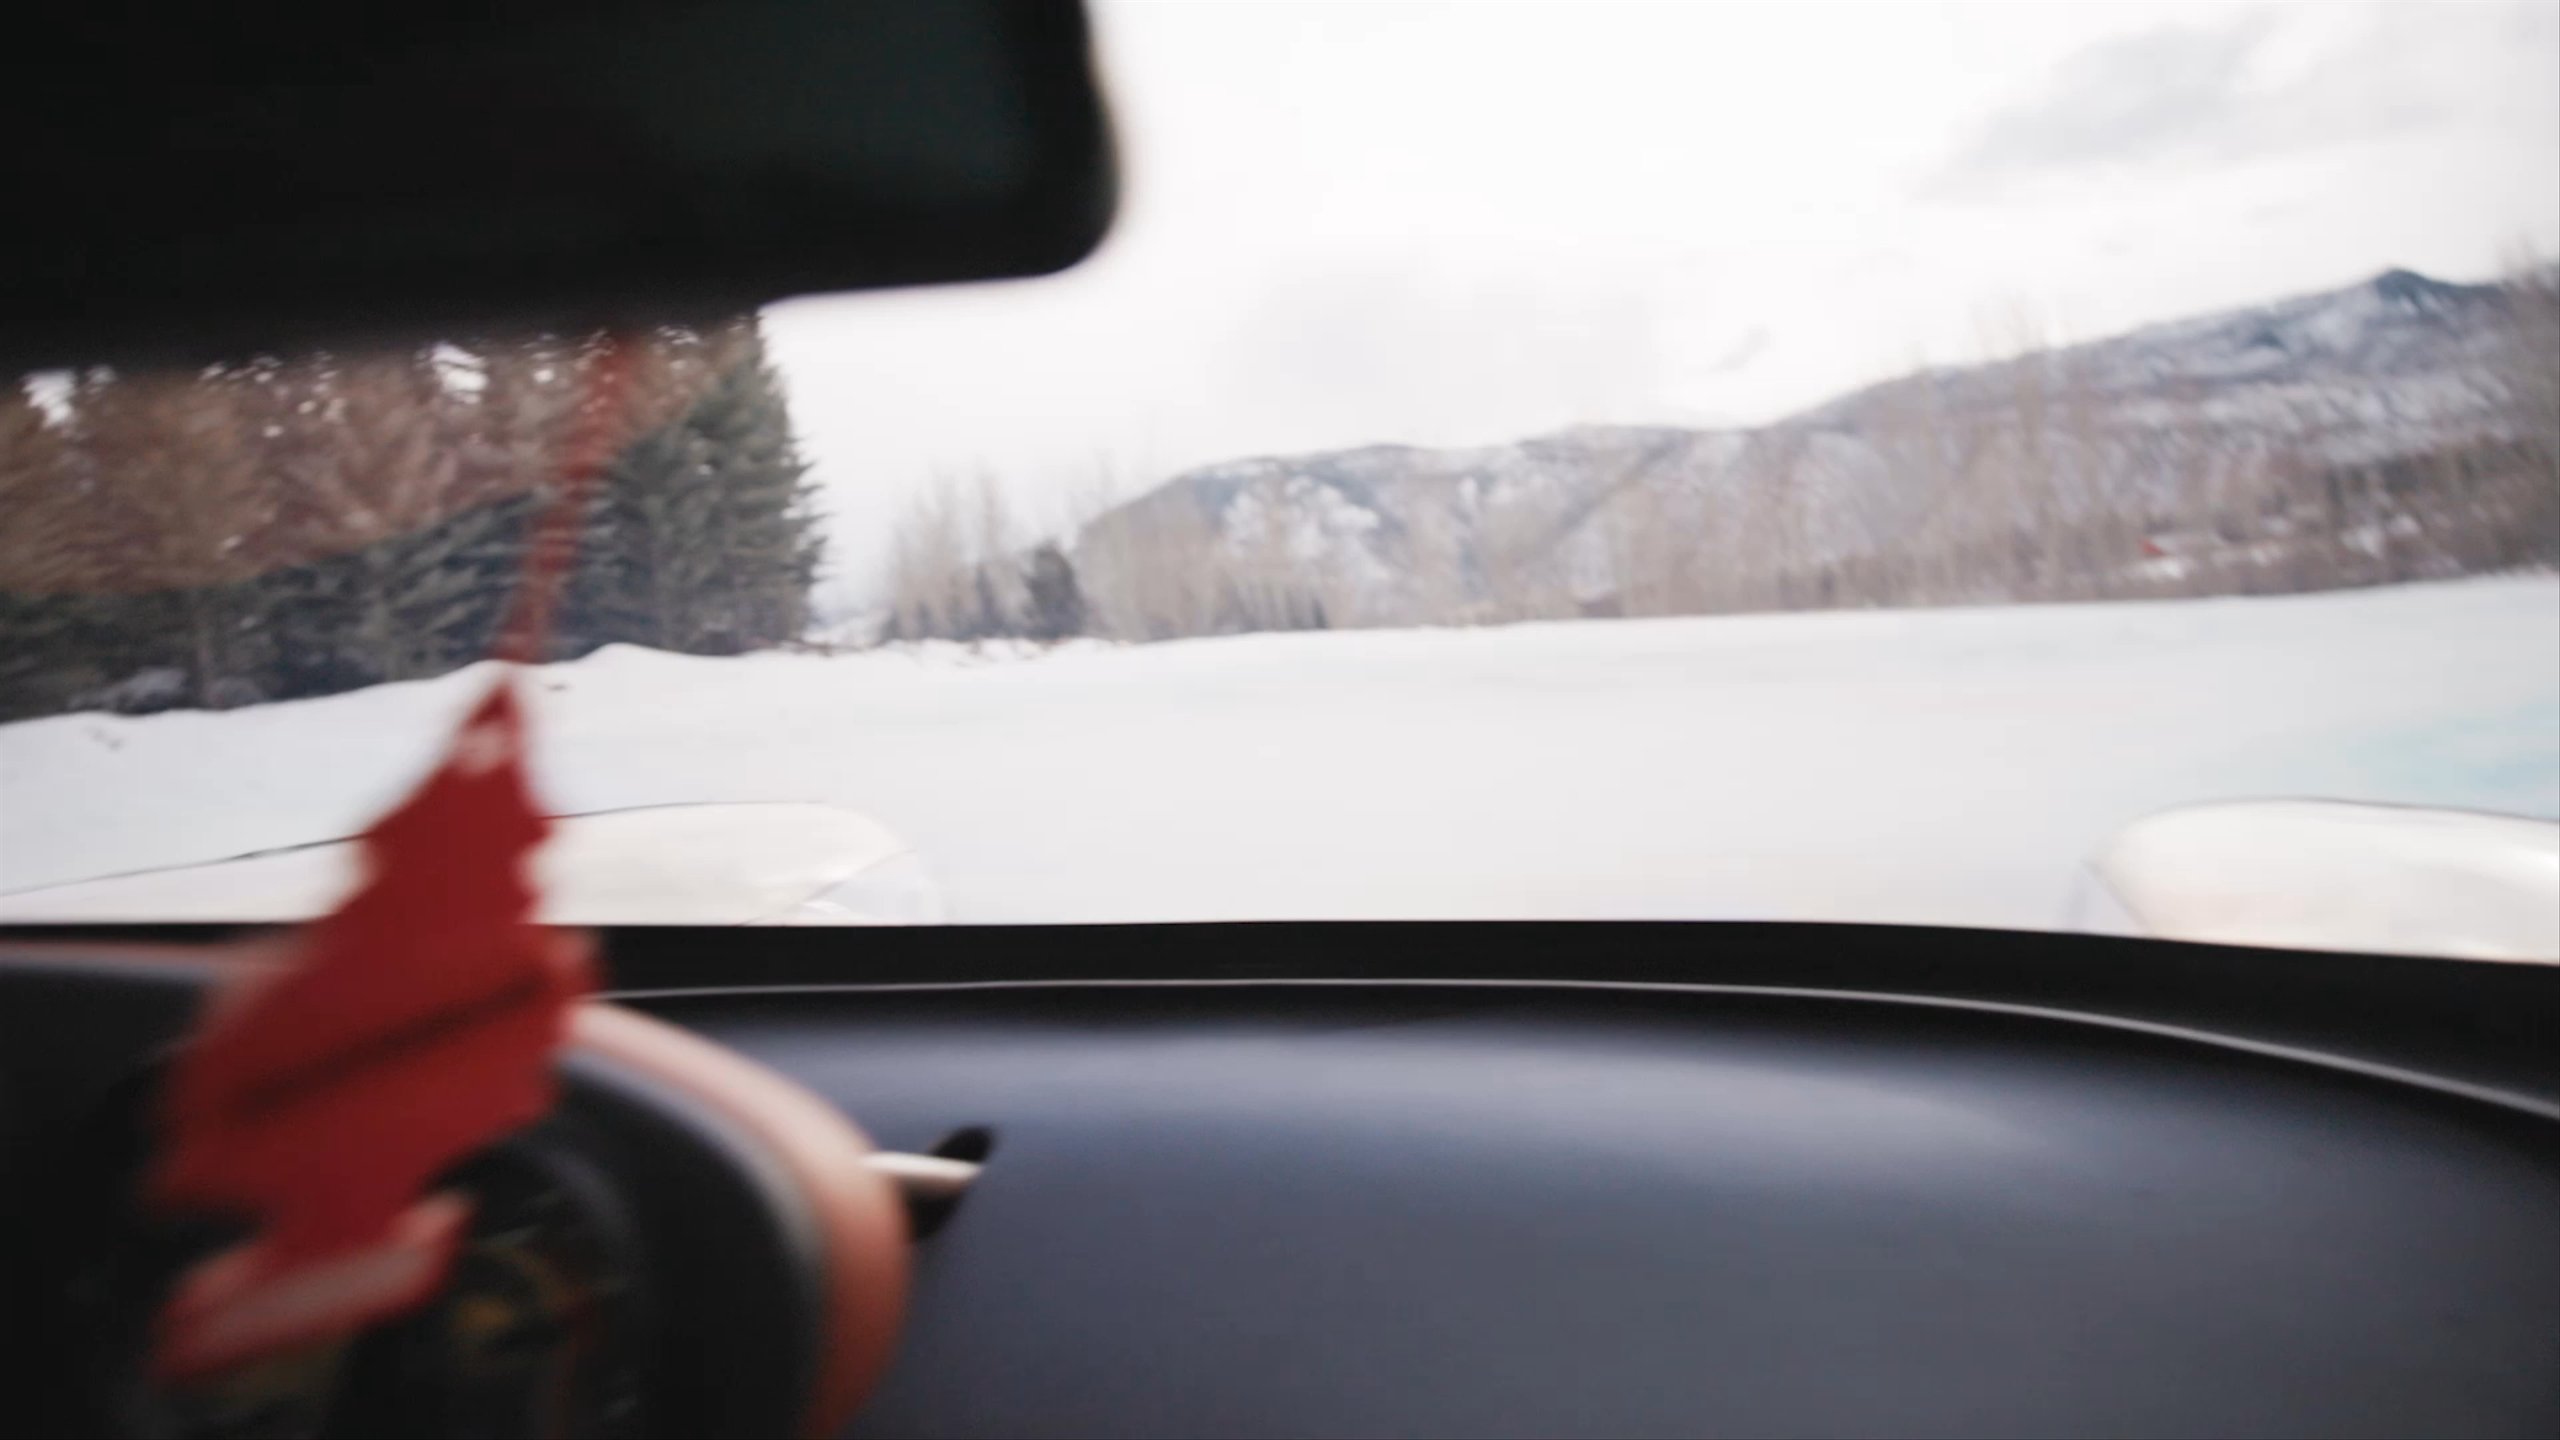 Video inside car of driver steering on the icy race track